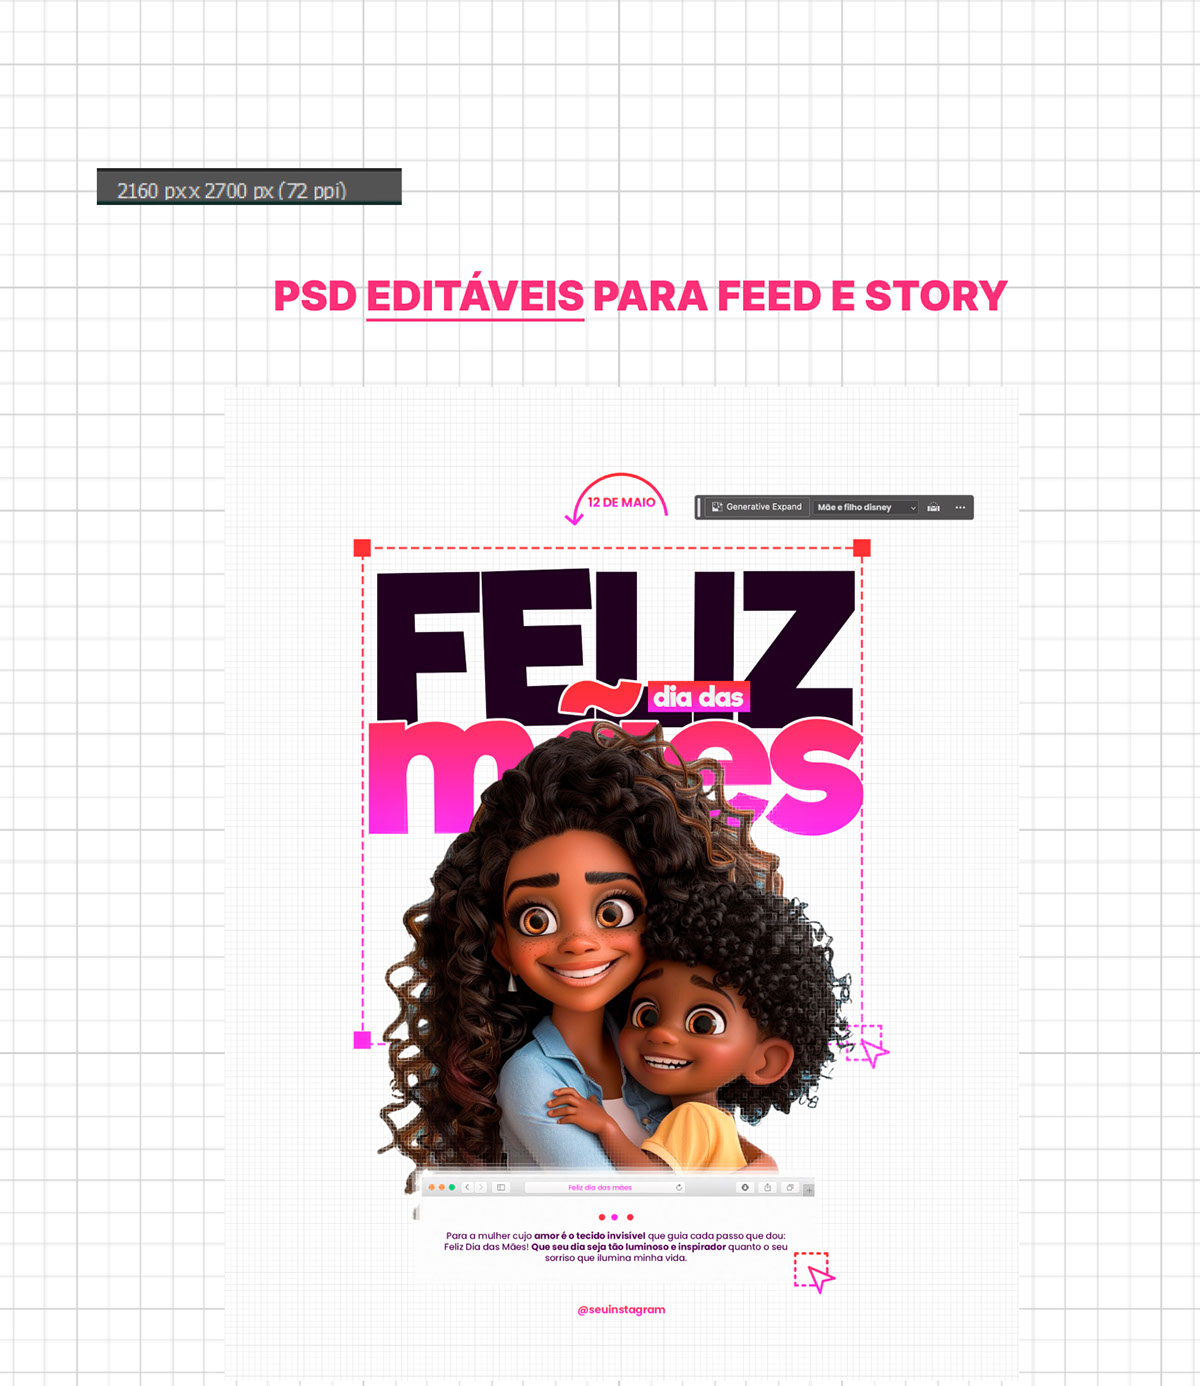 PSD Feed e Story rendition image